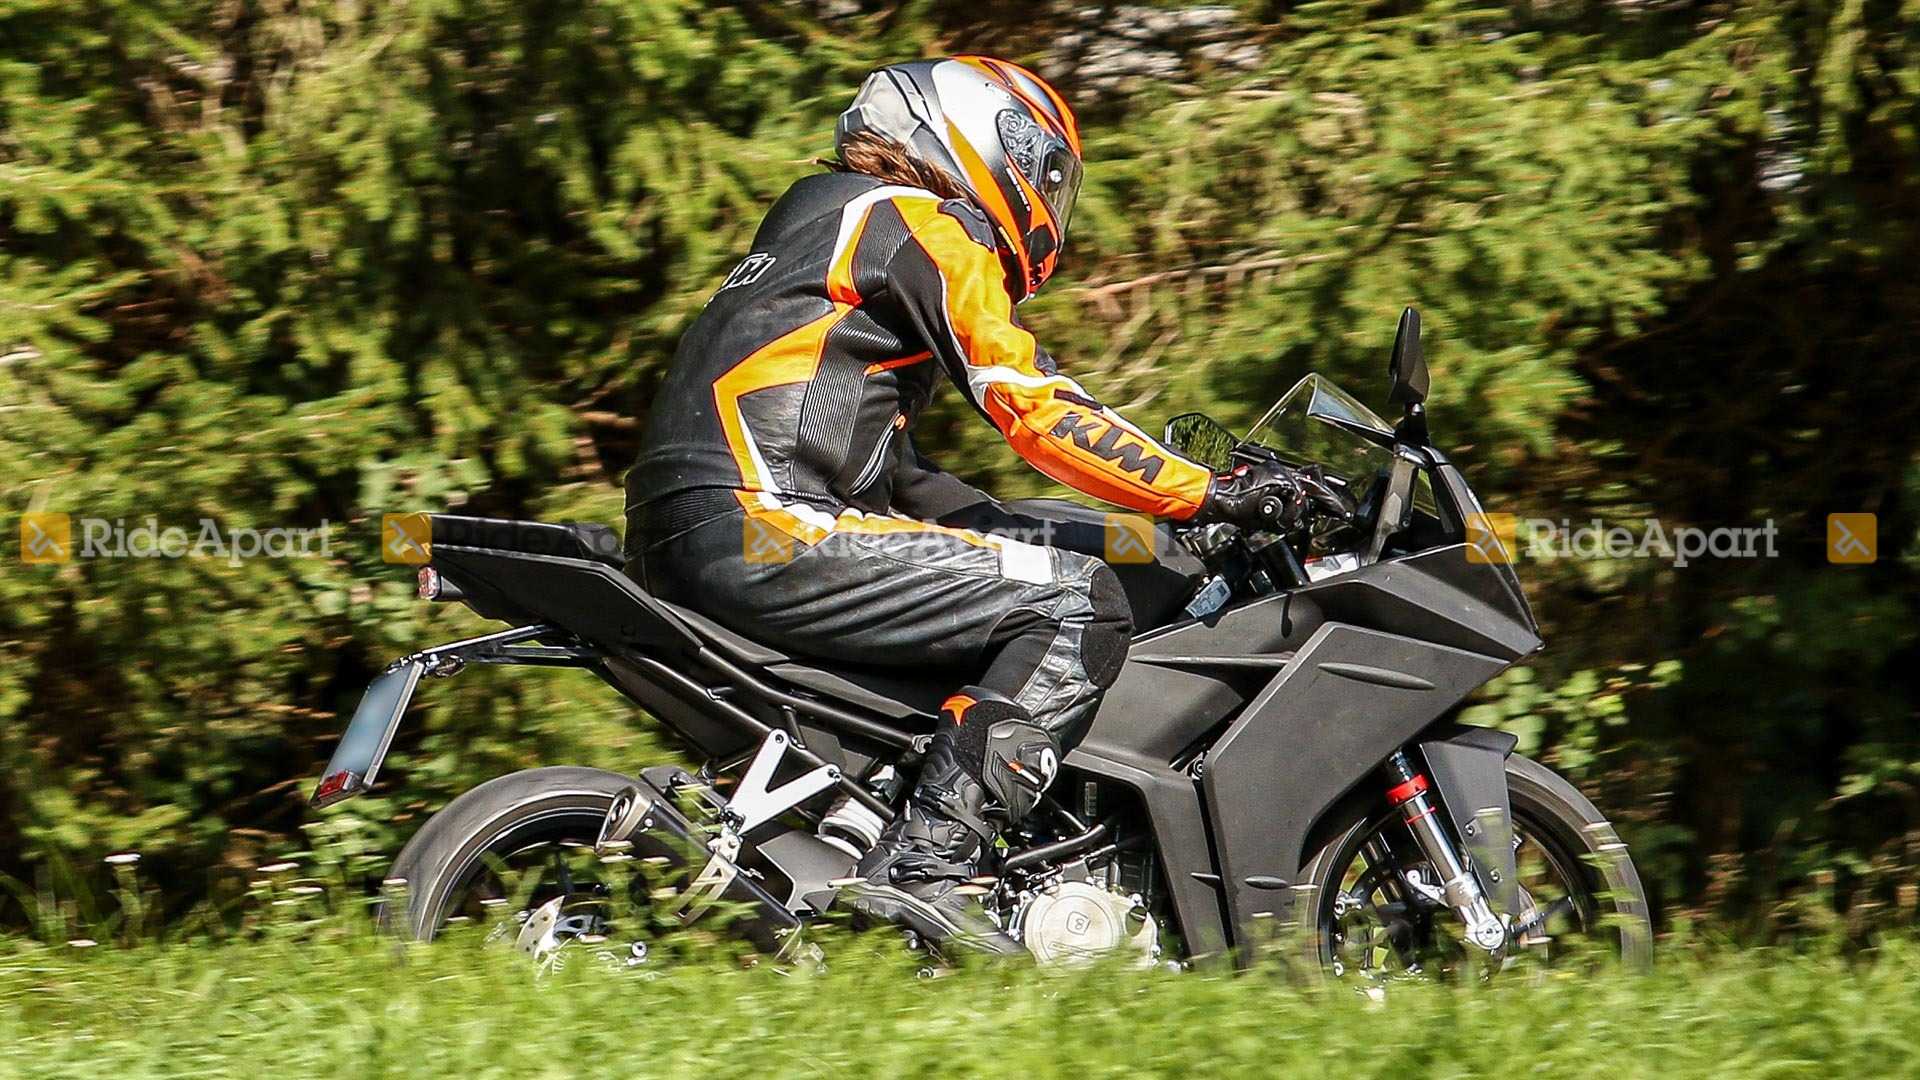 Production-Ready 2020 KTM RC 390 Surfaces Online - pic